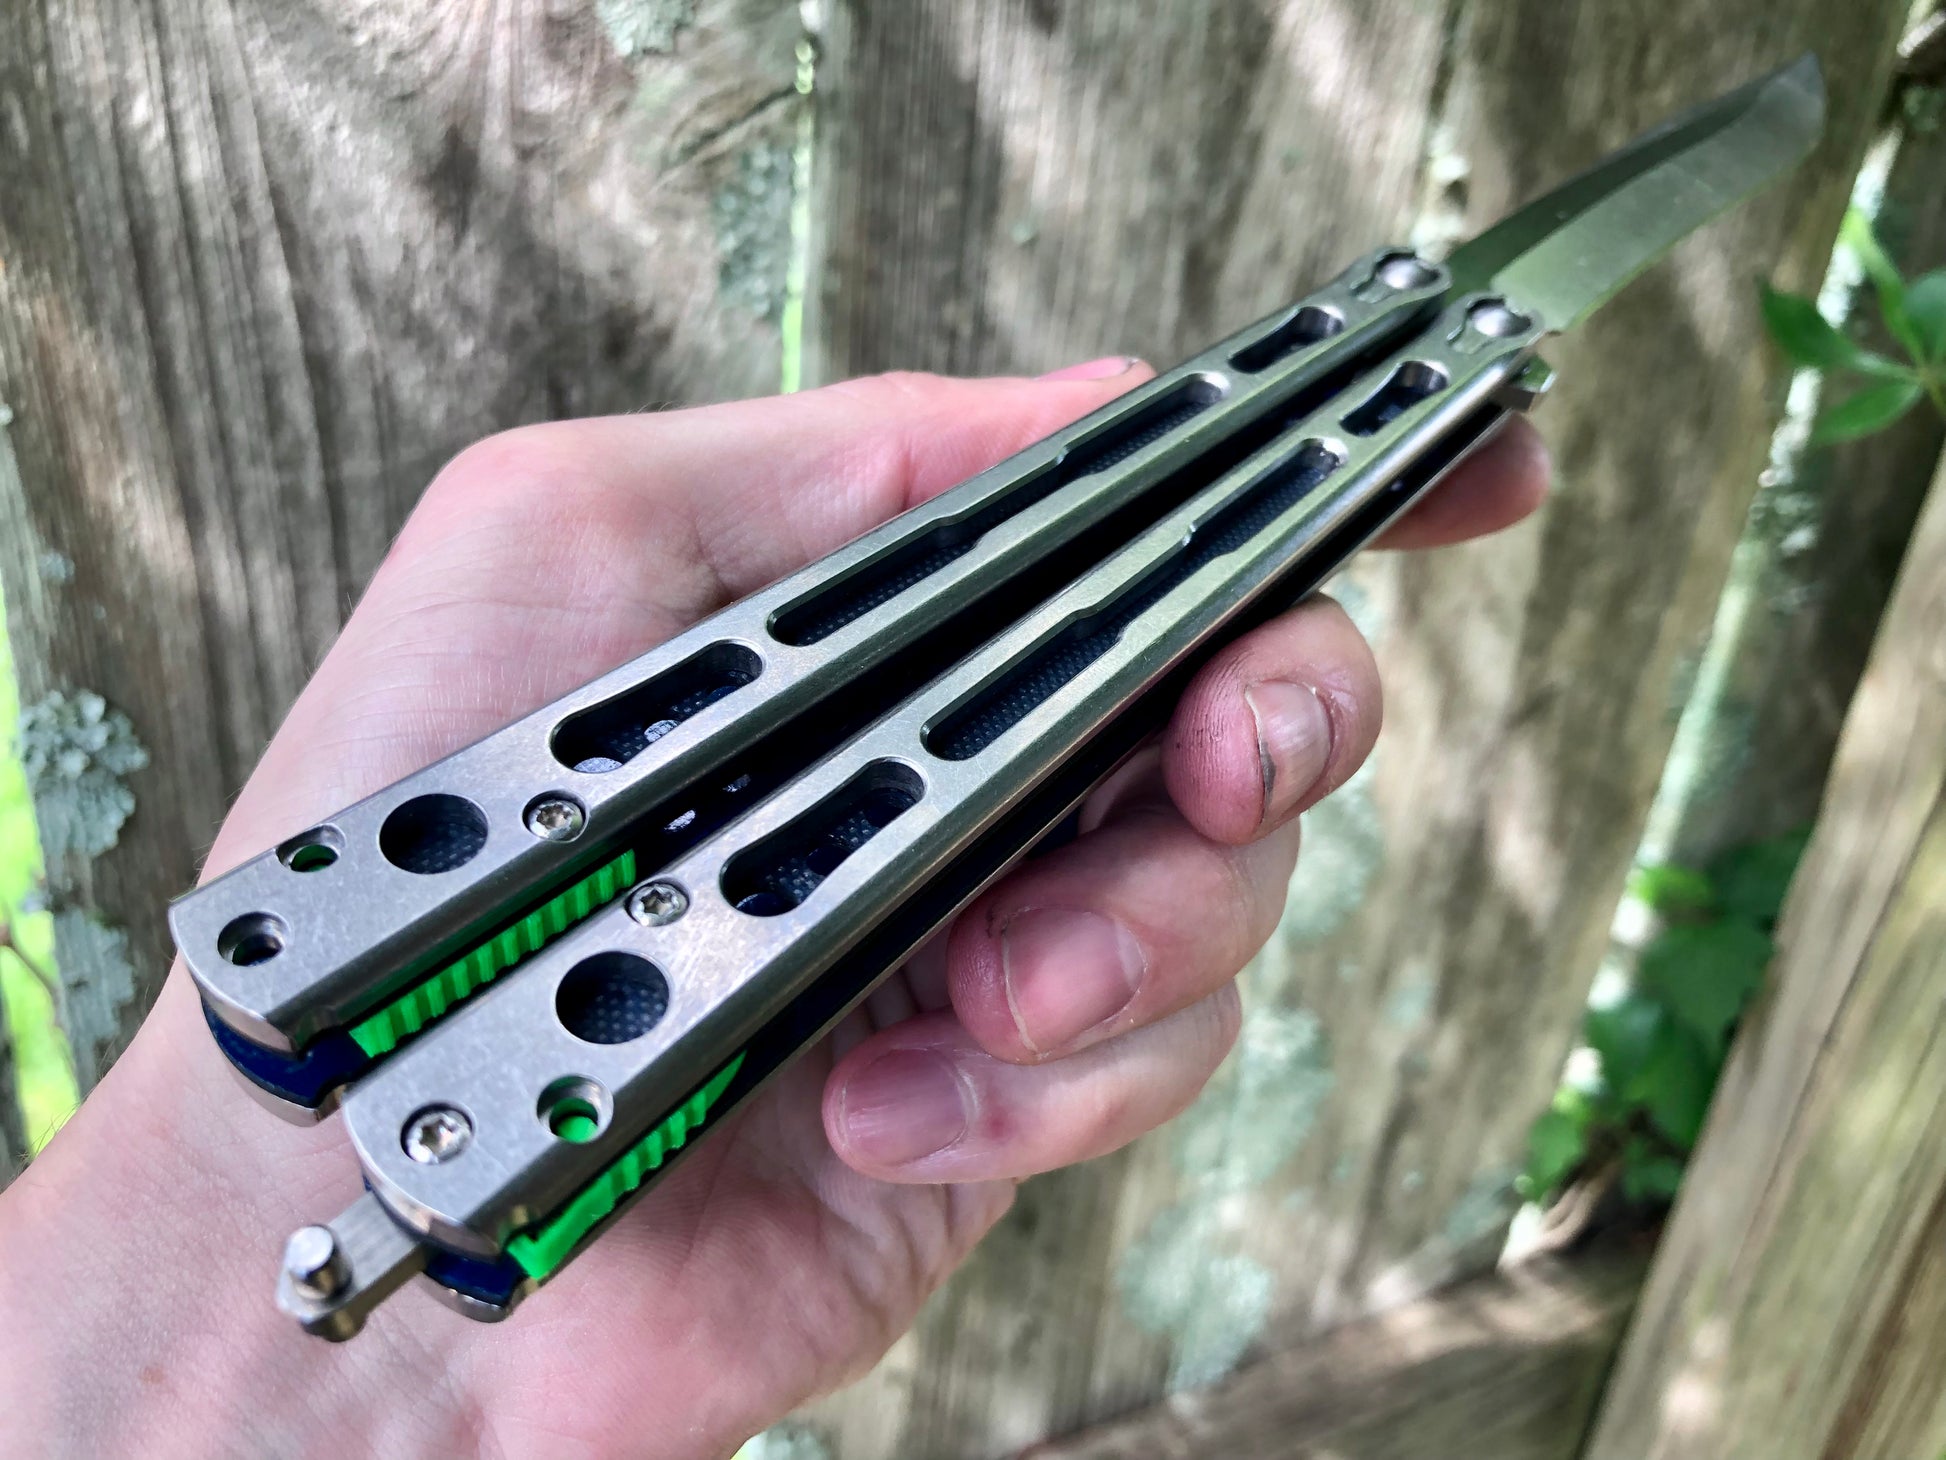 Make your HOM Chimera balisong a more neutral flipper with Zippy spacers: full-length spacers with jimping, or spring-latch spacers that counterweight the safe handle for improved balance.